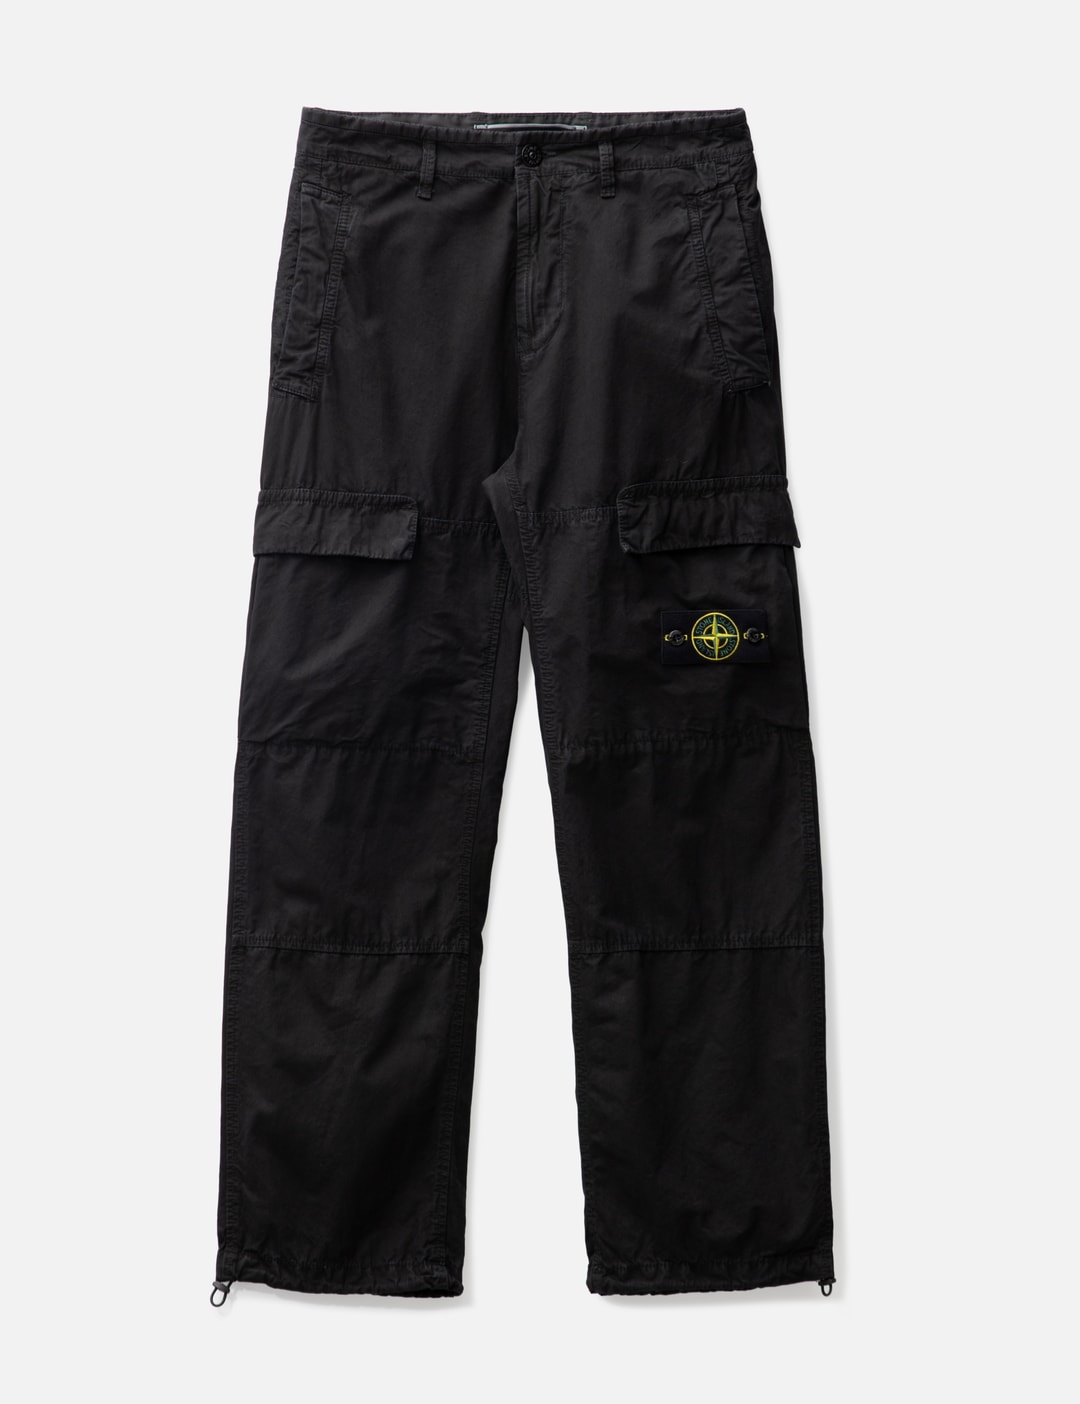 'OLD' TREATMENT CARGO PANTS - 1